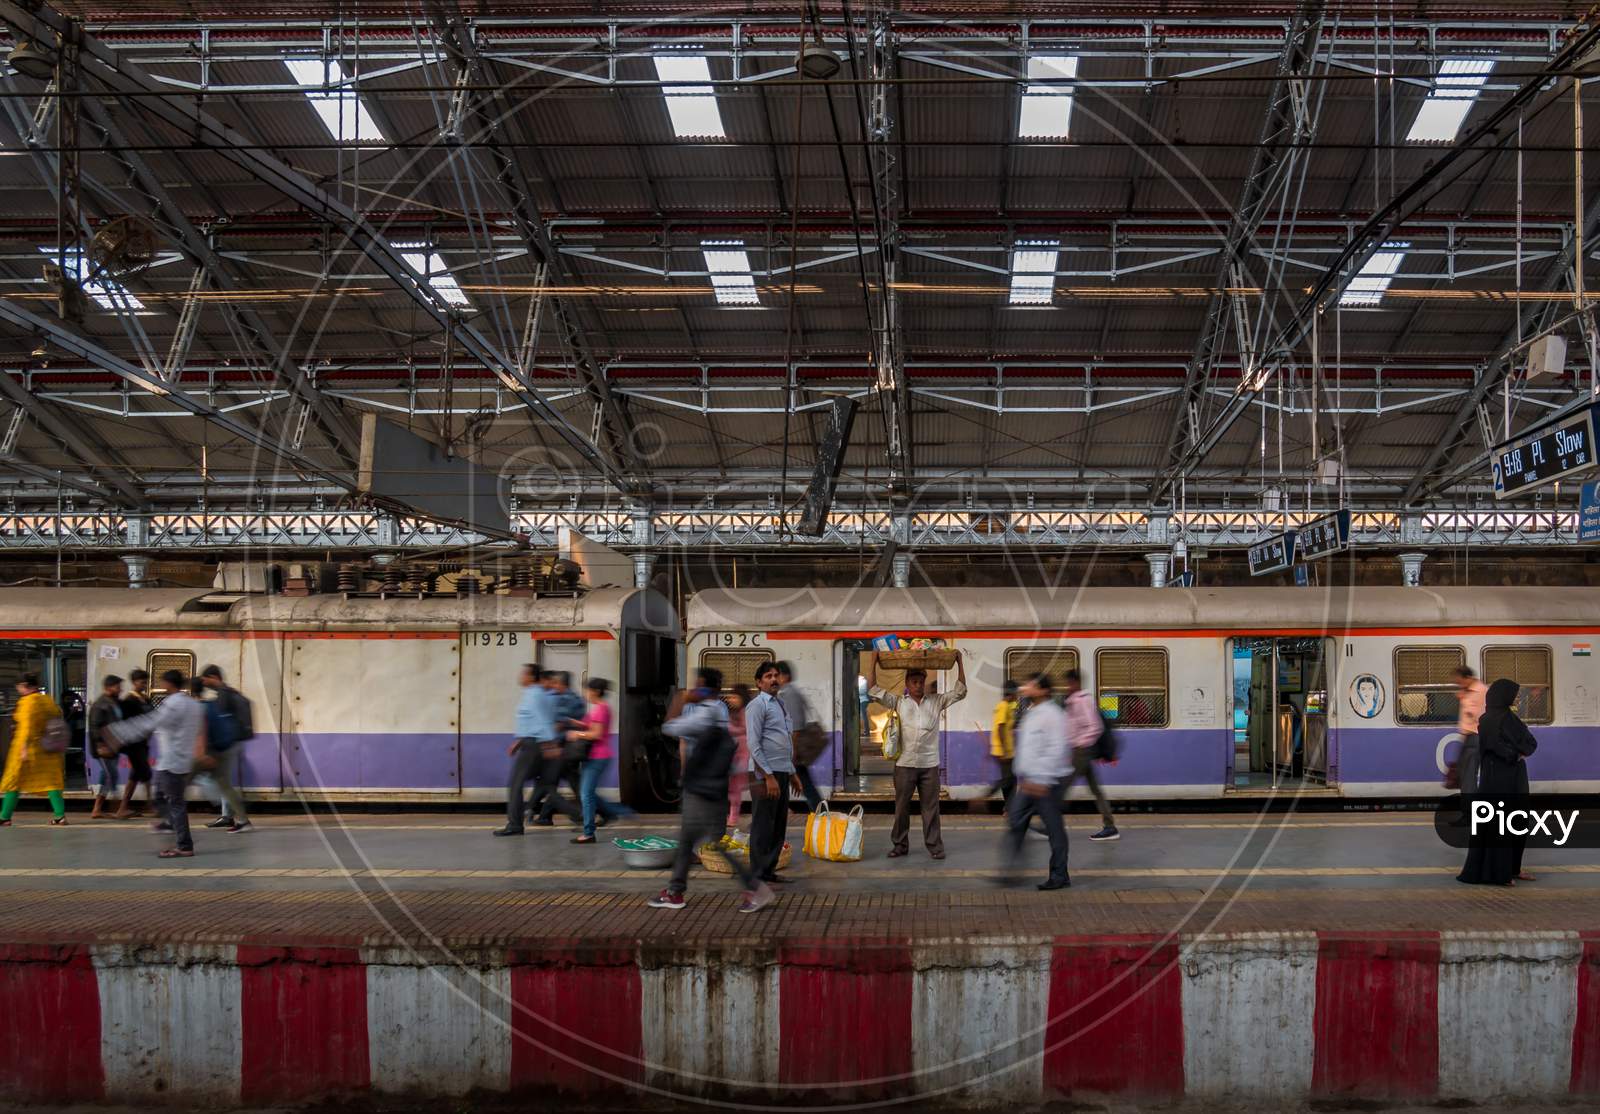 Unidentified Passengers Walking On A Platform At Rush Hours At Cst Station